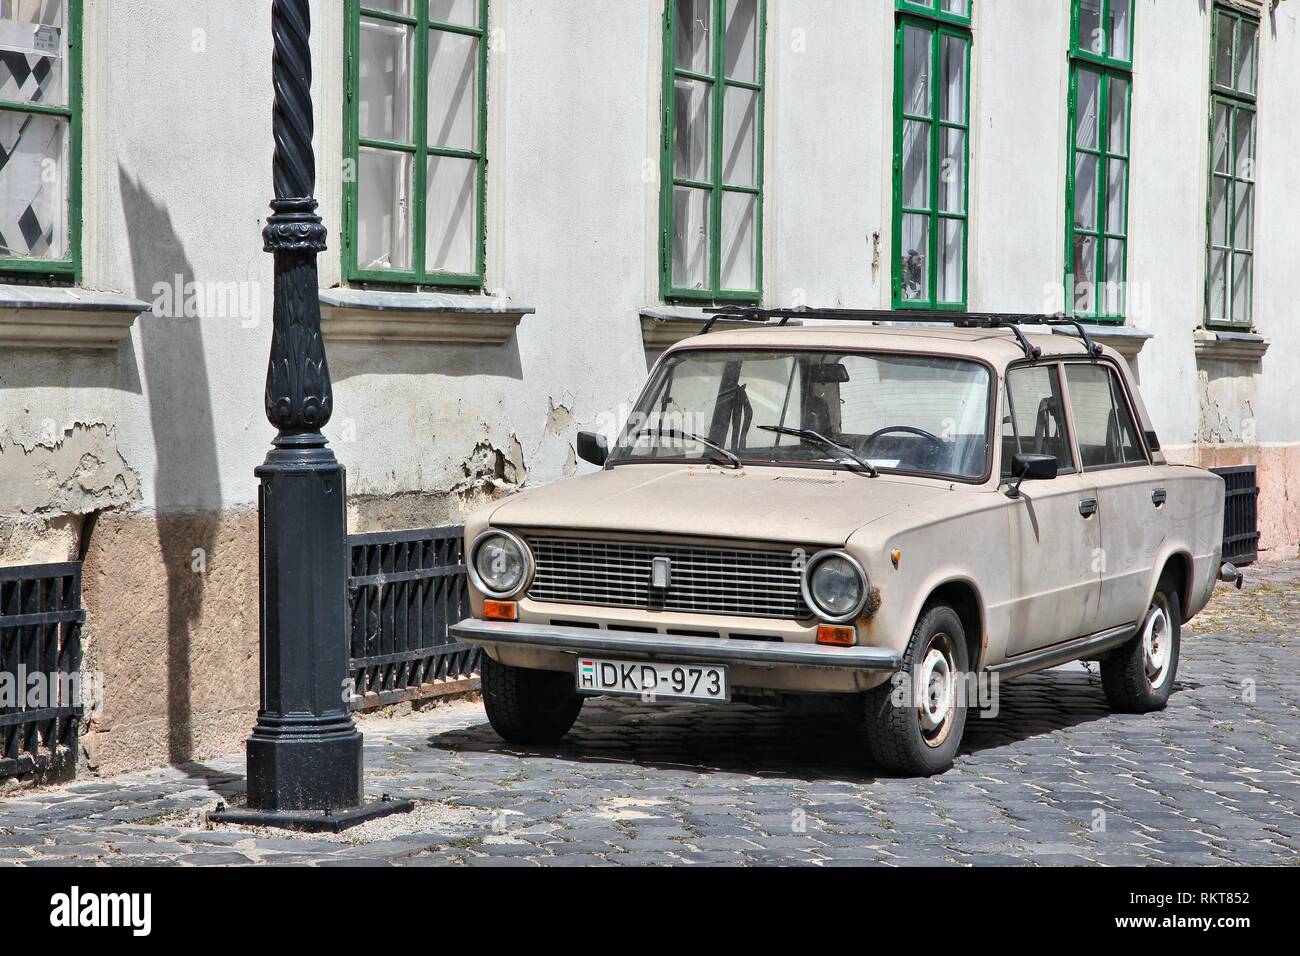 BUDAPEST, HUNGARY - JUNE 21, 2014: Classic Lada 1200 car parked in Budapest, Hungary. The car is also known as VAZ 2101 or Zhiguli. Stock Photo